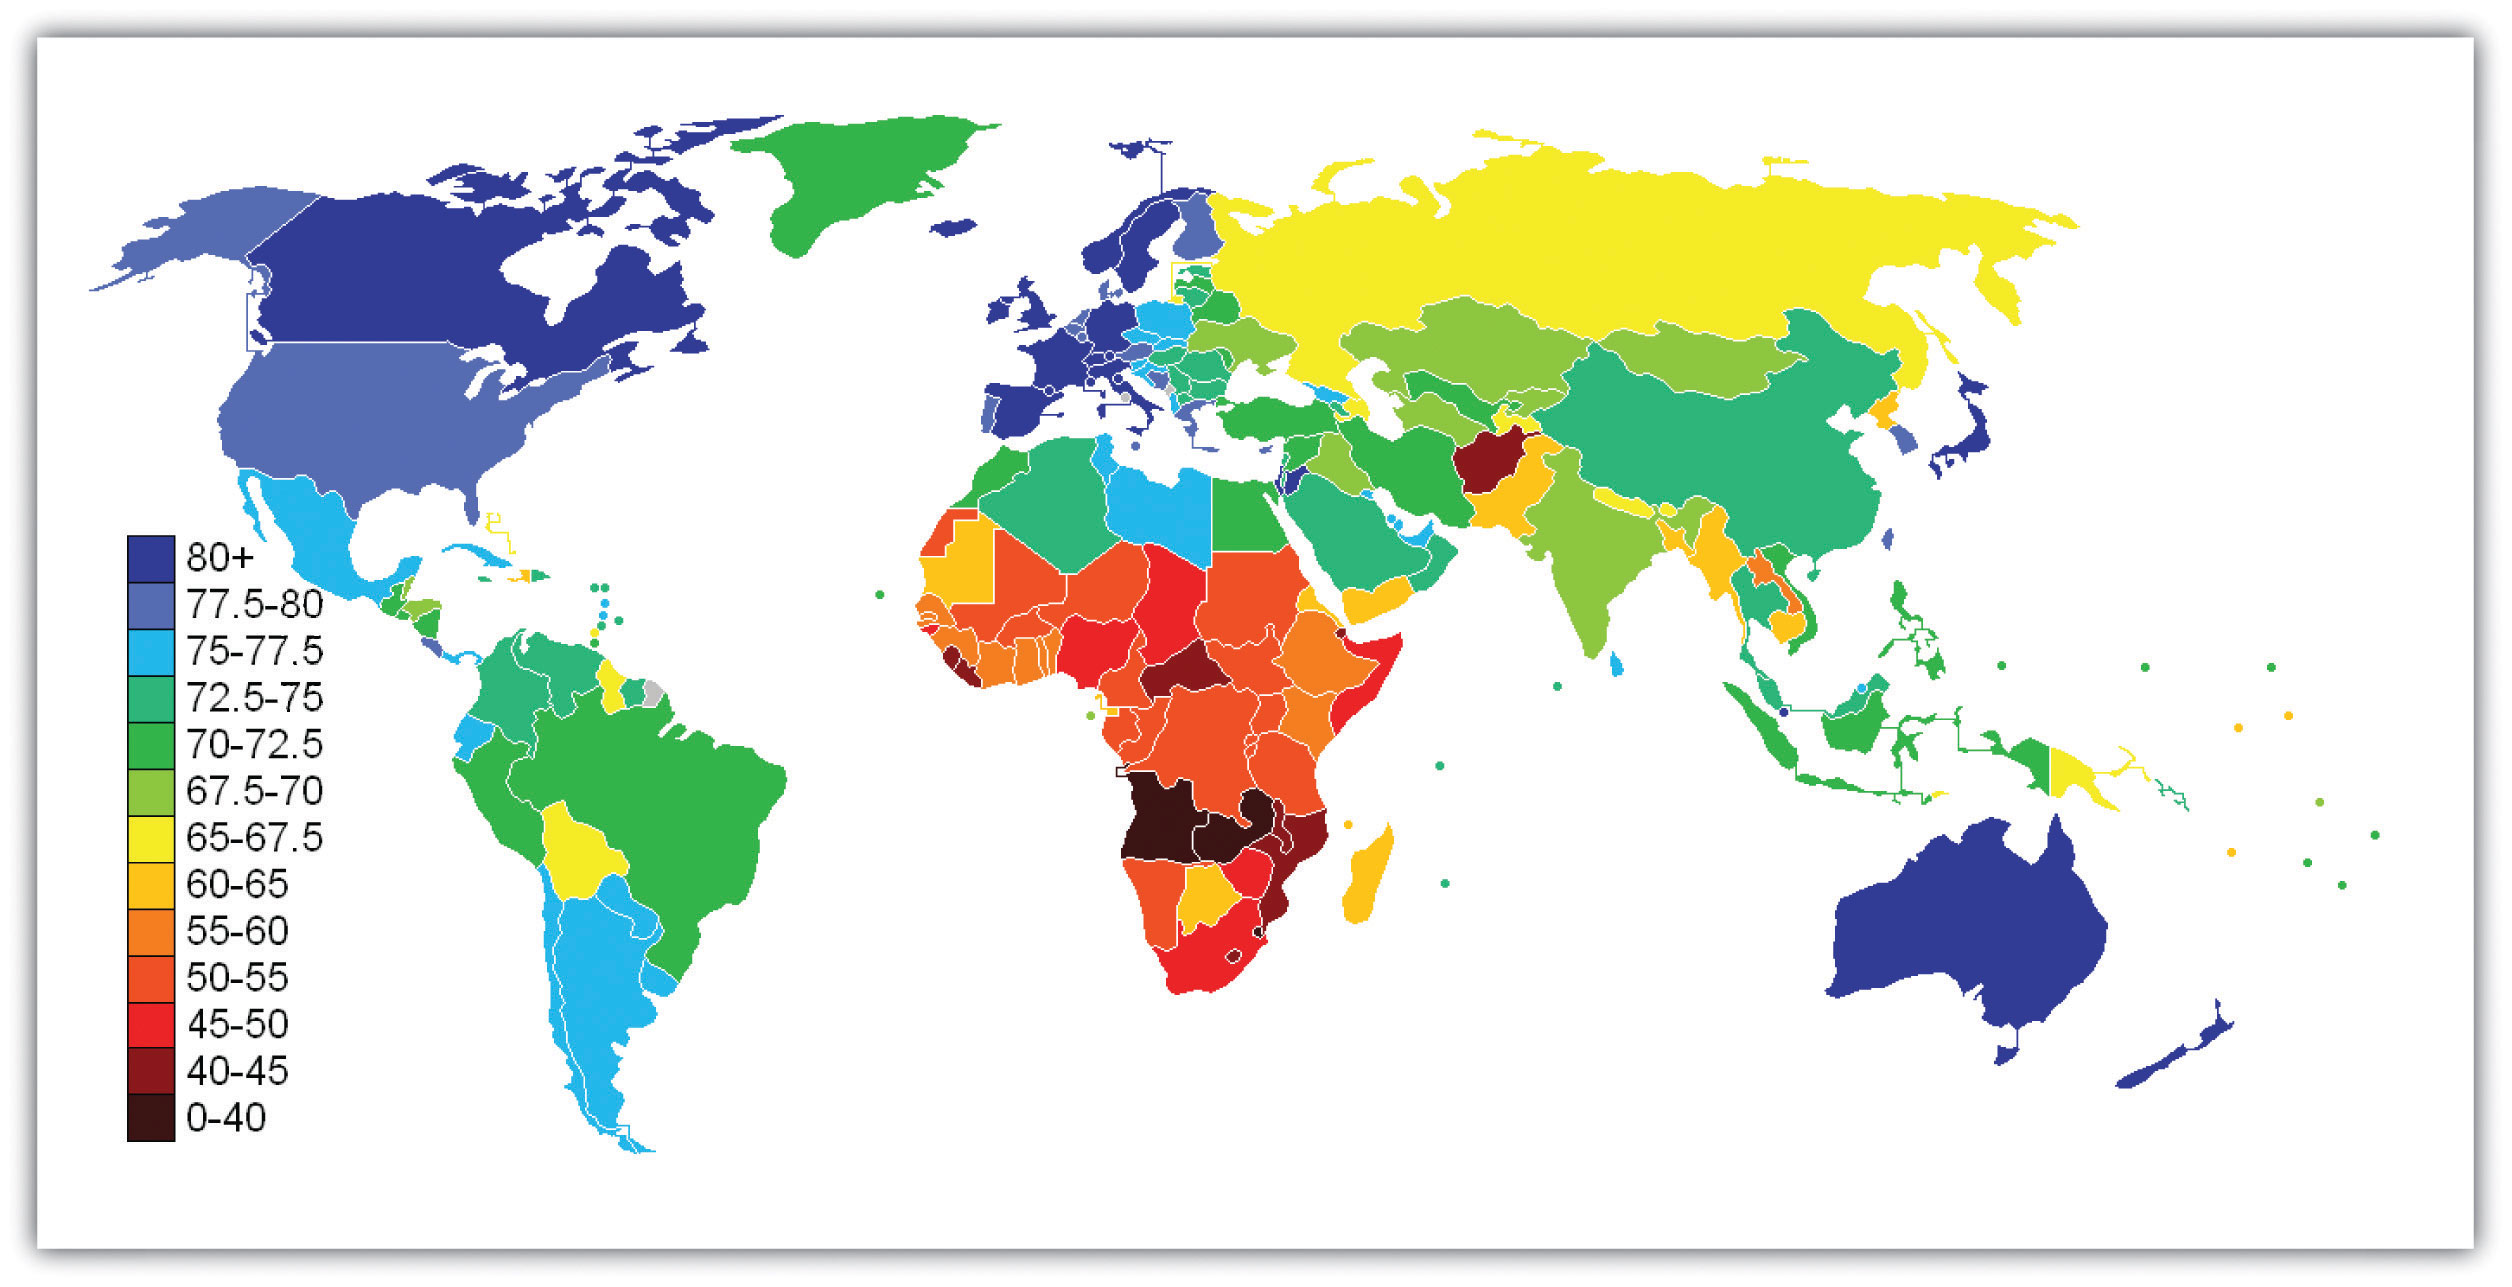 Average Life Expectancy across the Globe in Years. Highest life expectancies are seen in North America, Western Europe, Australia and Japan. Lower life expectancies are seen in many parts of Africa